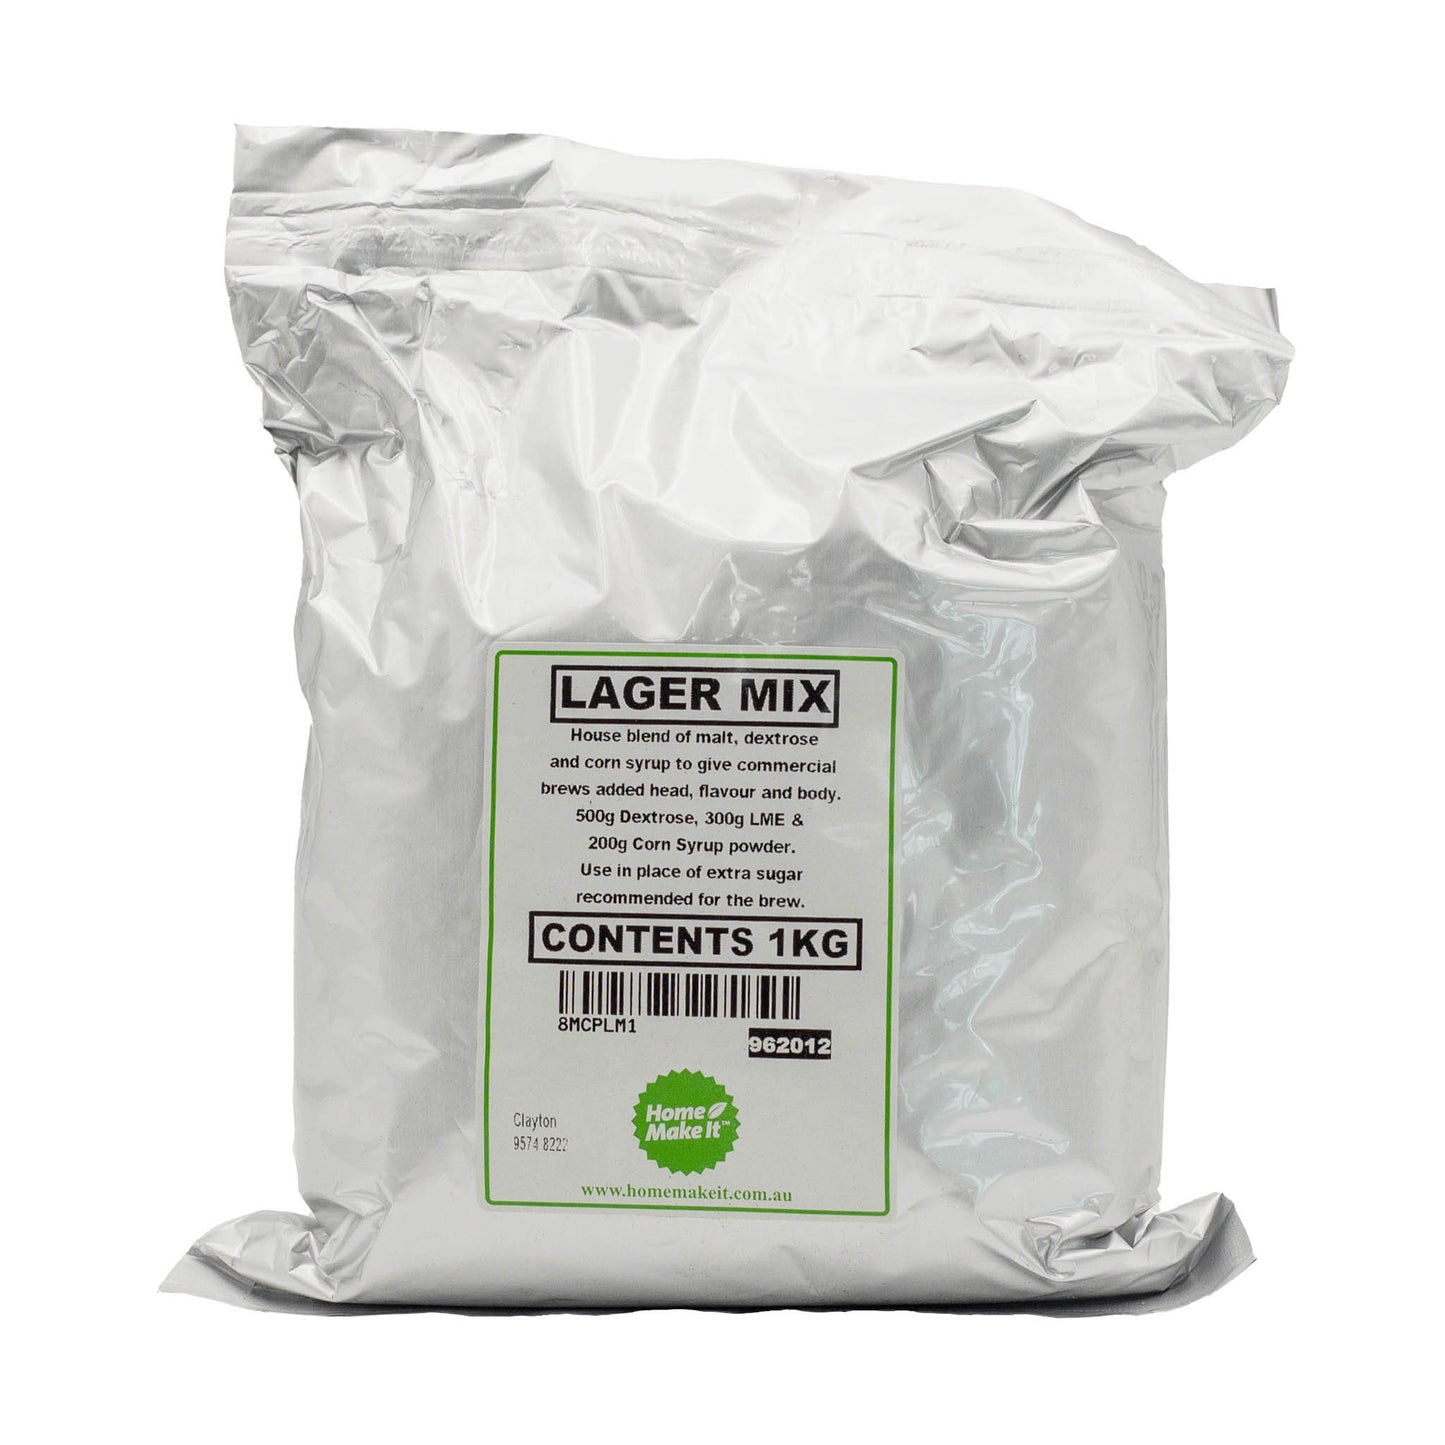 1kg. bag of dried lager malt mix. Specially formulated for lager style beers, head development and palate characteristics.